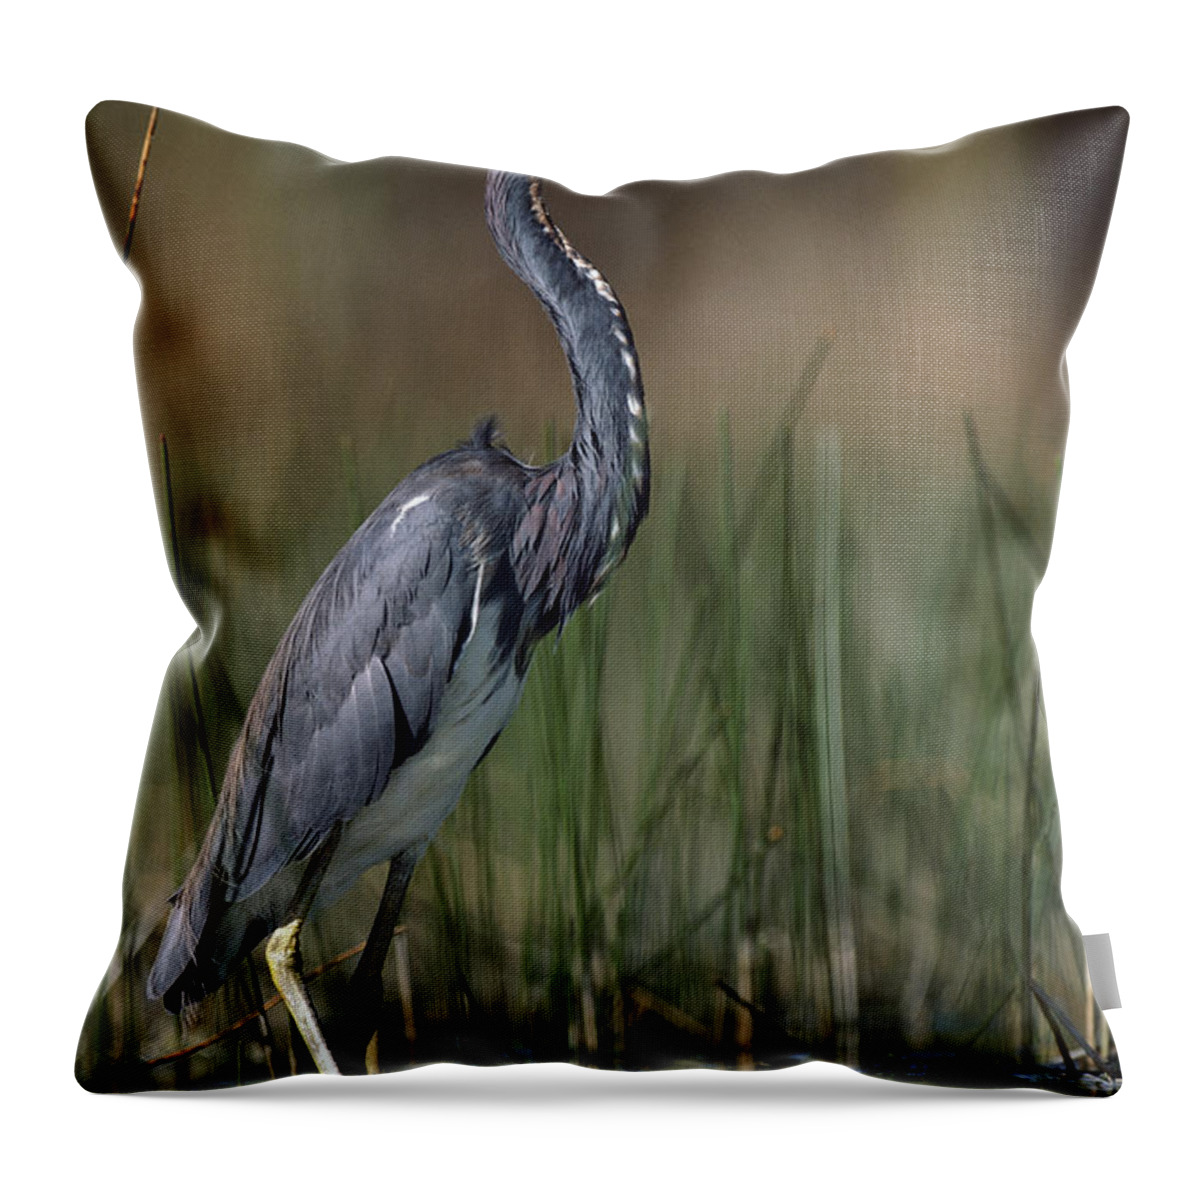 00176589 Throw Pillow featuring the photograph Tricolored Heron Wading North America by Tim Fitzharris